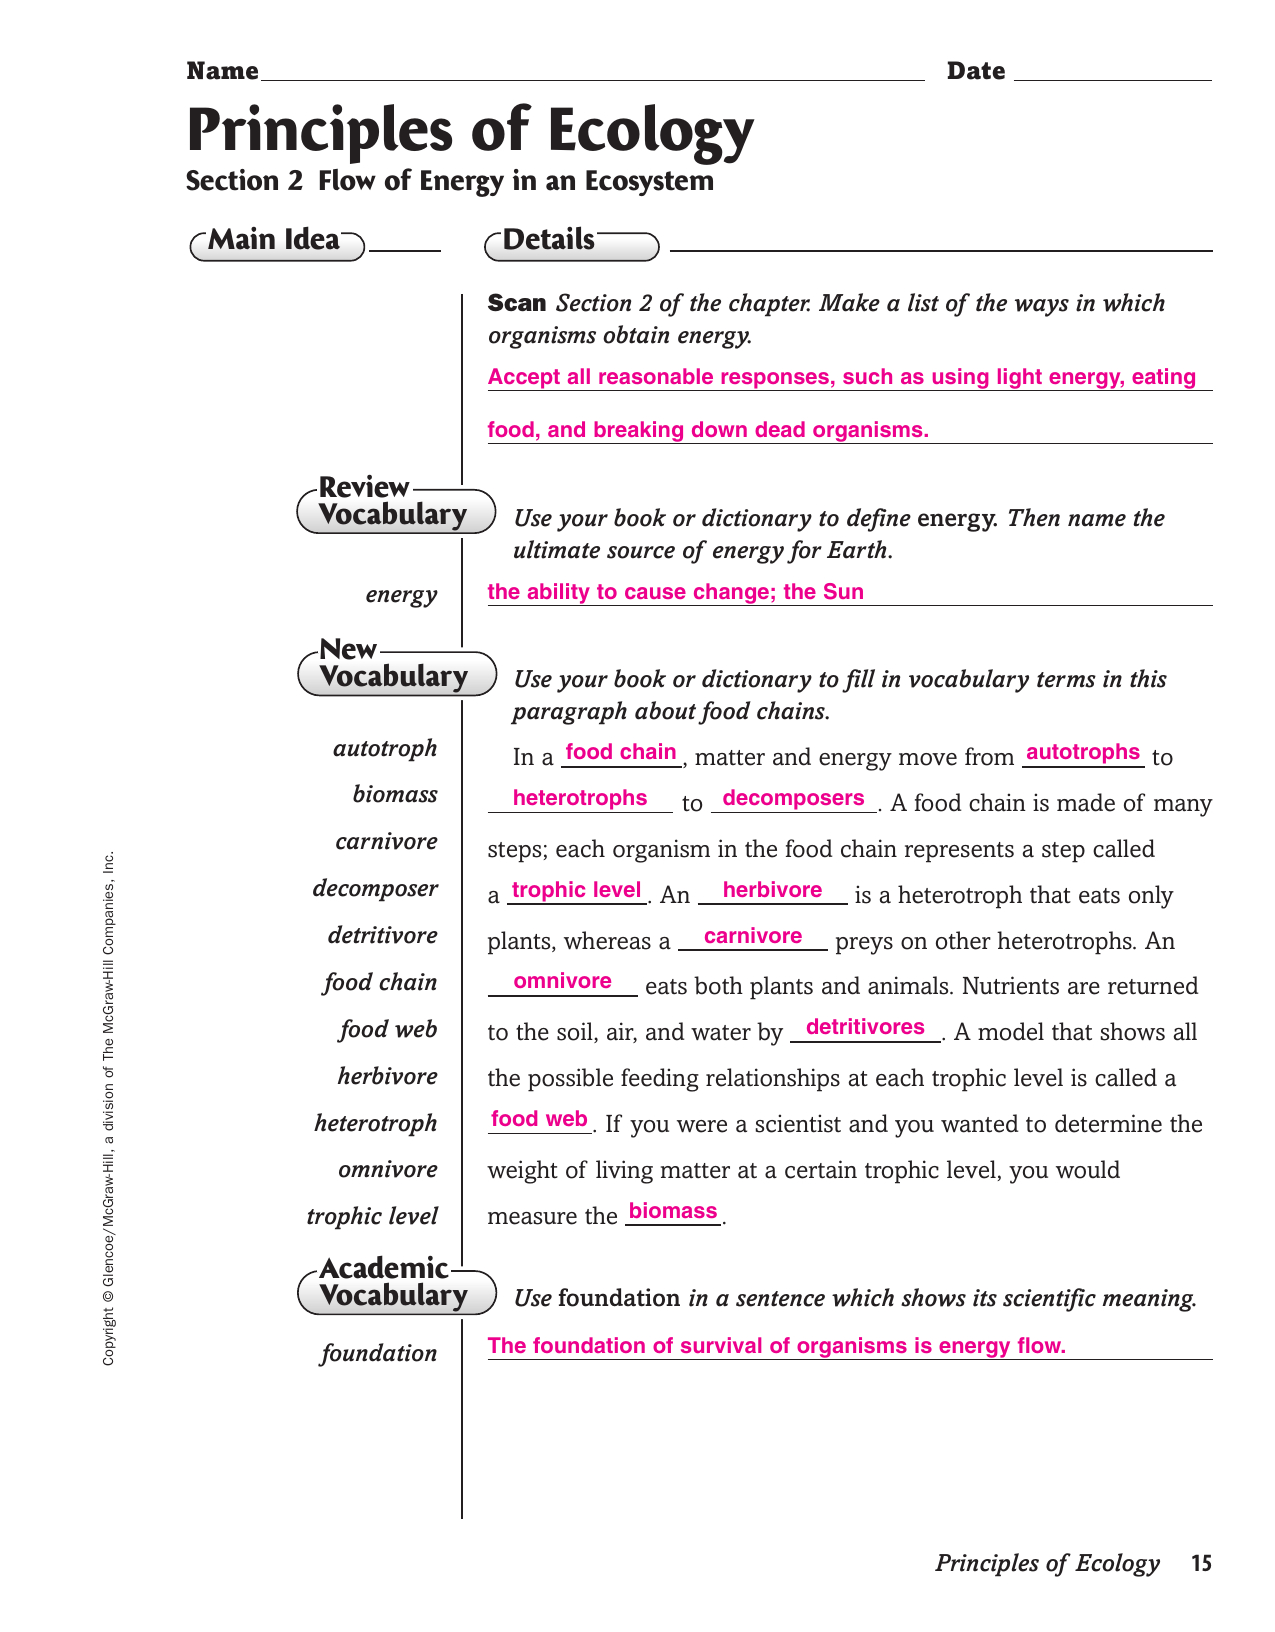 Chapter 2 Principles Of Ecology Worksheet Answers Db excel